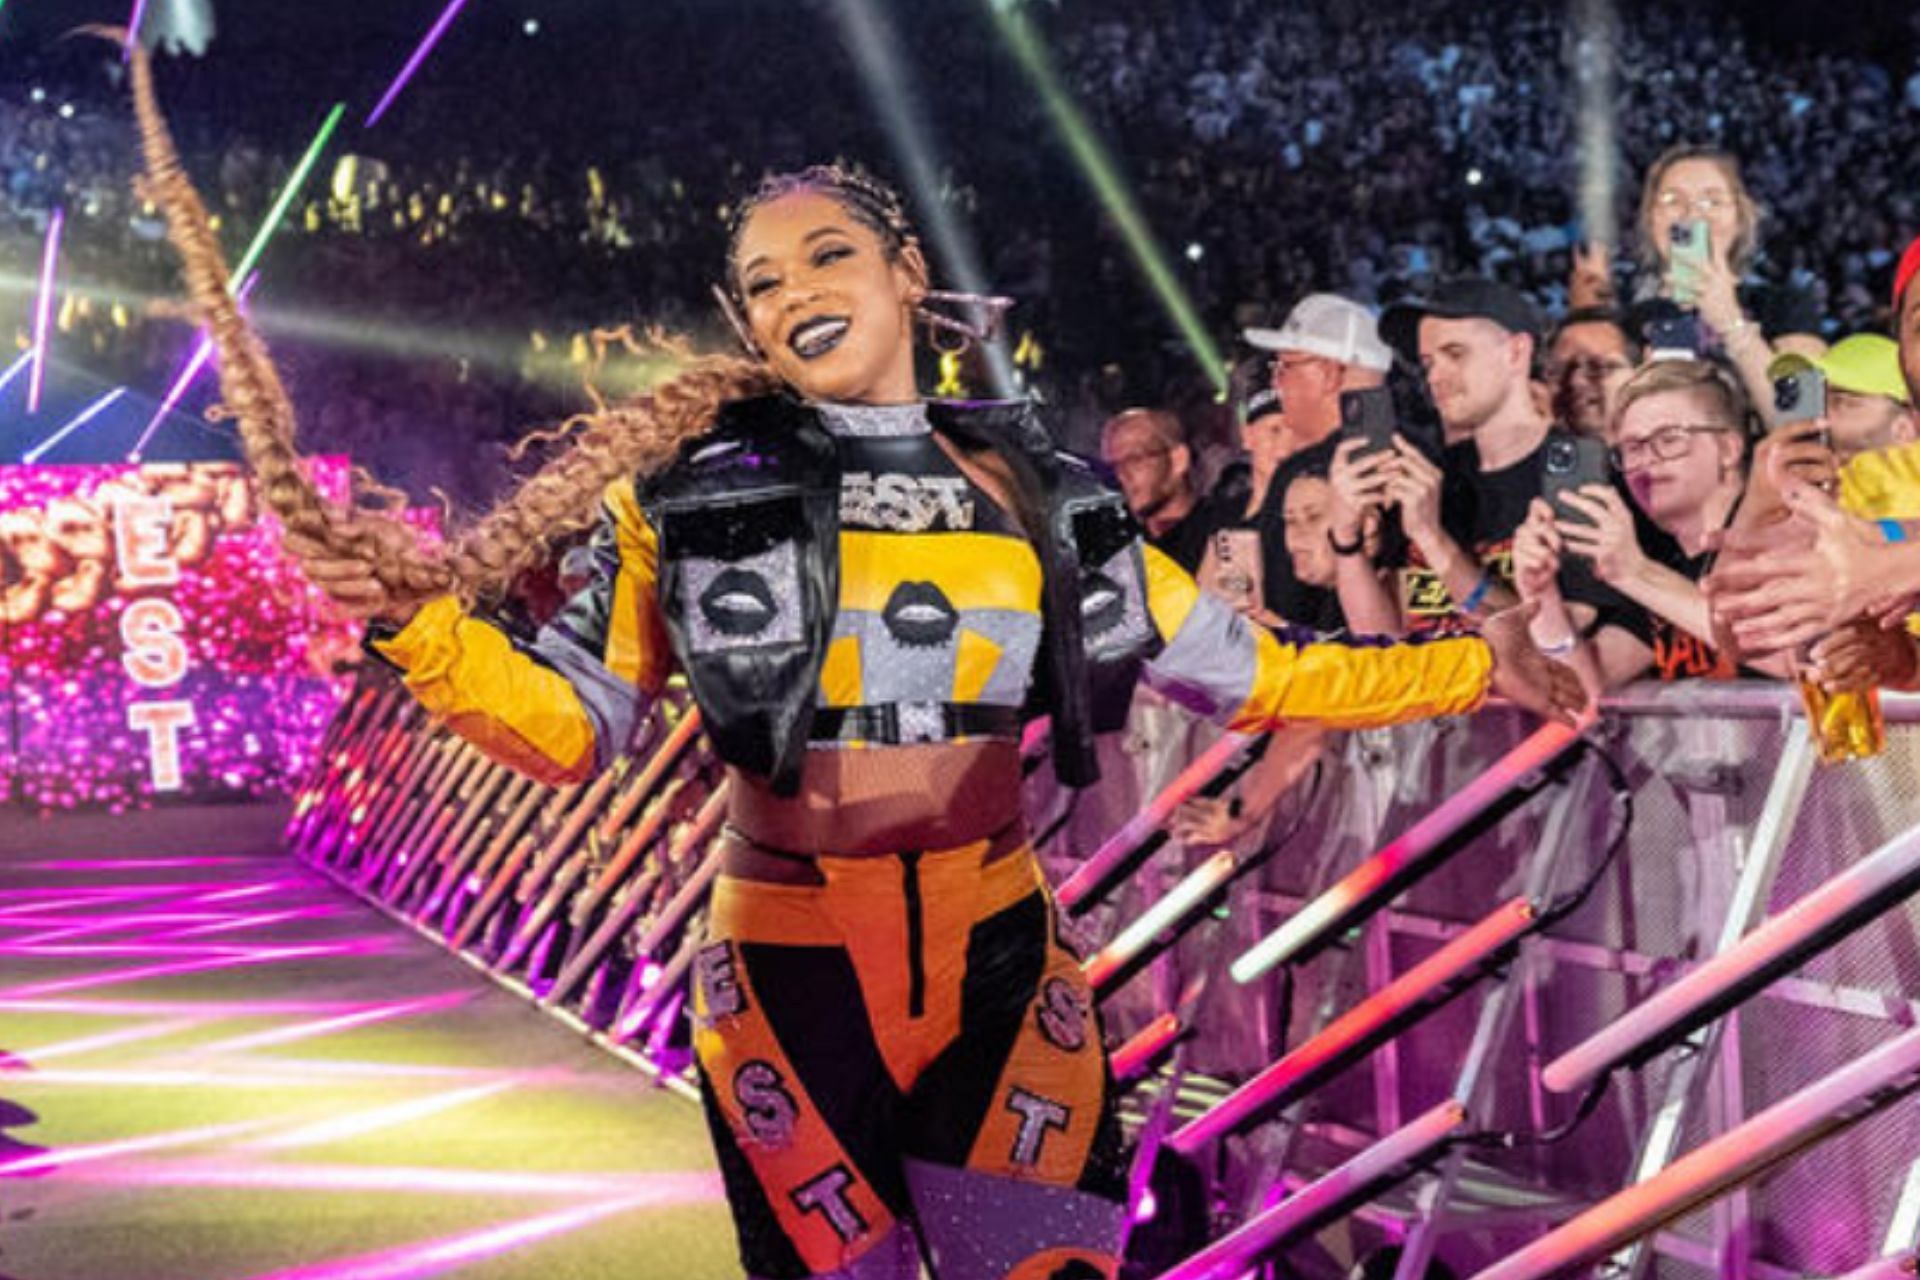 Bianca Belair has a lot of support in the wrestling world [Image Credits: www.wwe.com]